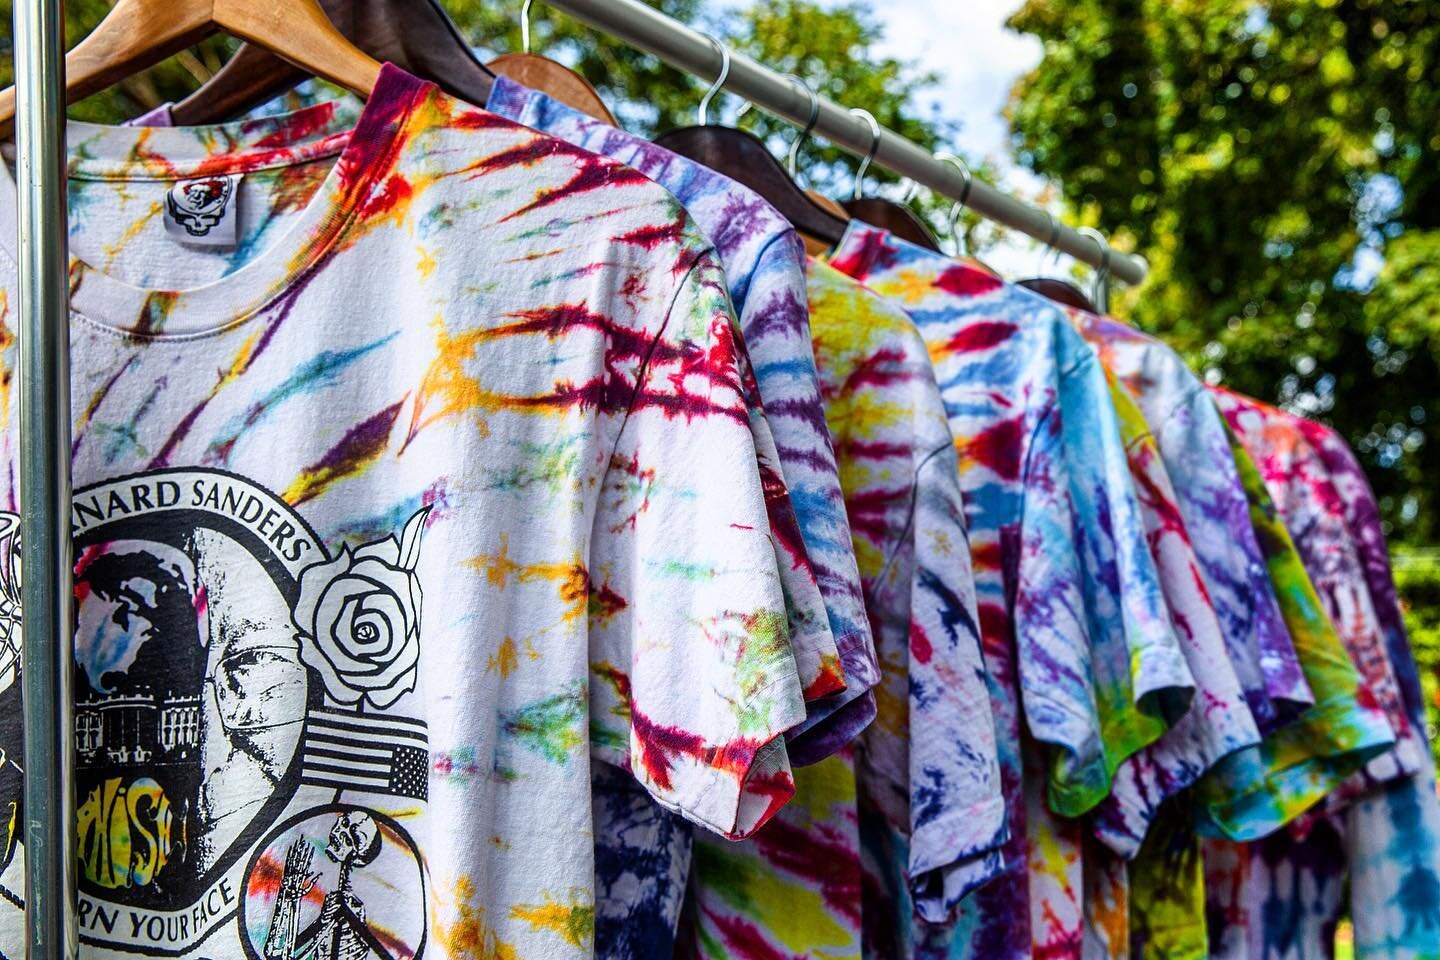 We loved working with t-shirt designer, tie dye artist and musician  @gordonkenny whose amazing designs can be found @steelyyourdan and @bernyourface
.
Check out the film we made for him documenting his process! 
.
.

#tiedye #tiedyefashion #tiedyelo